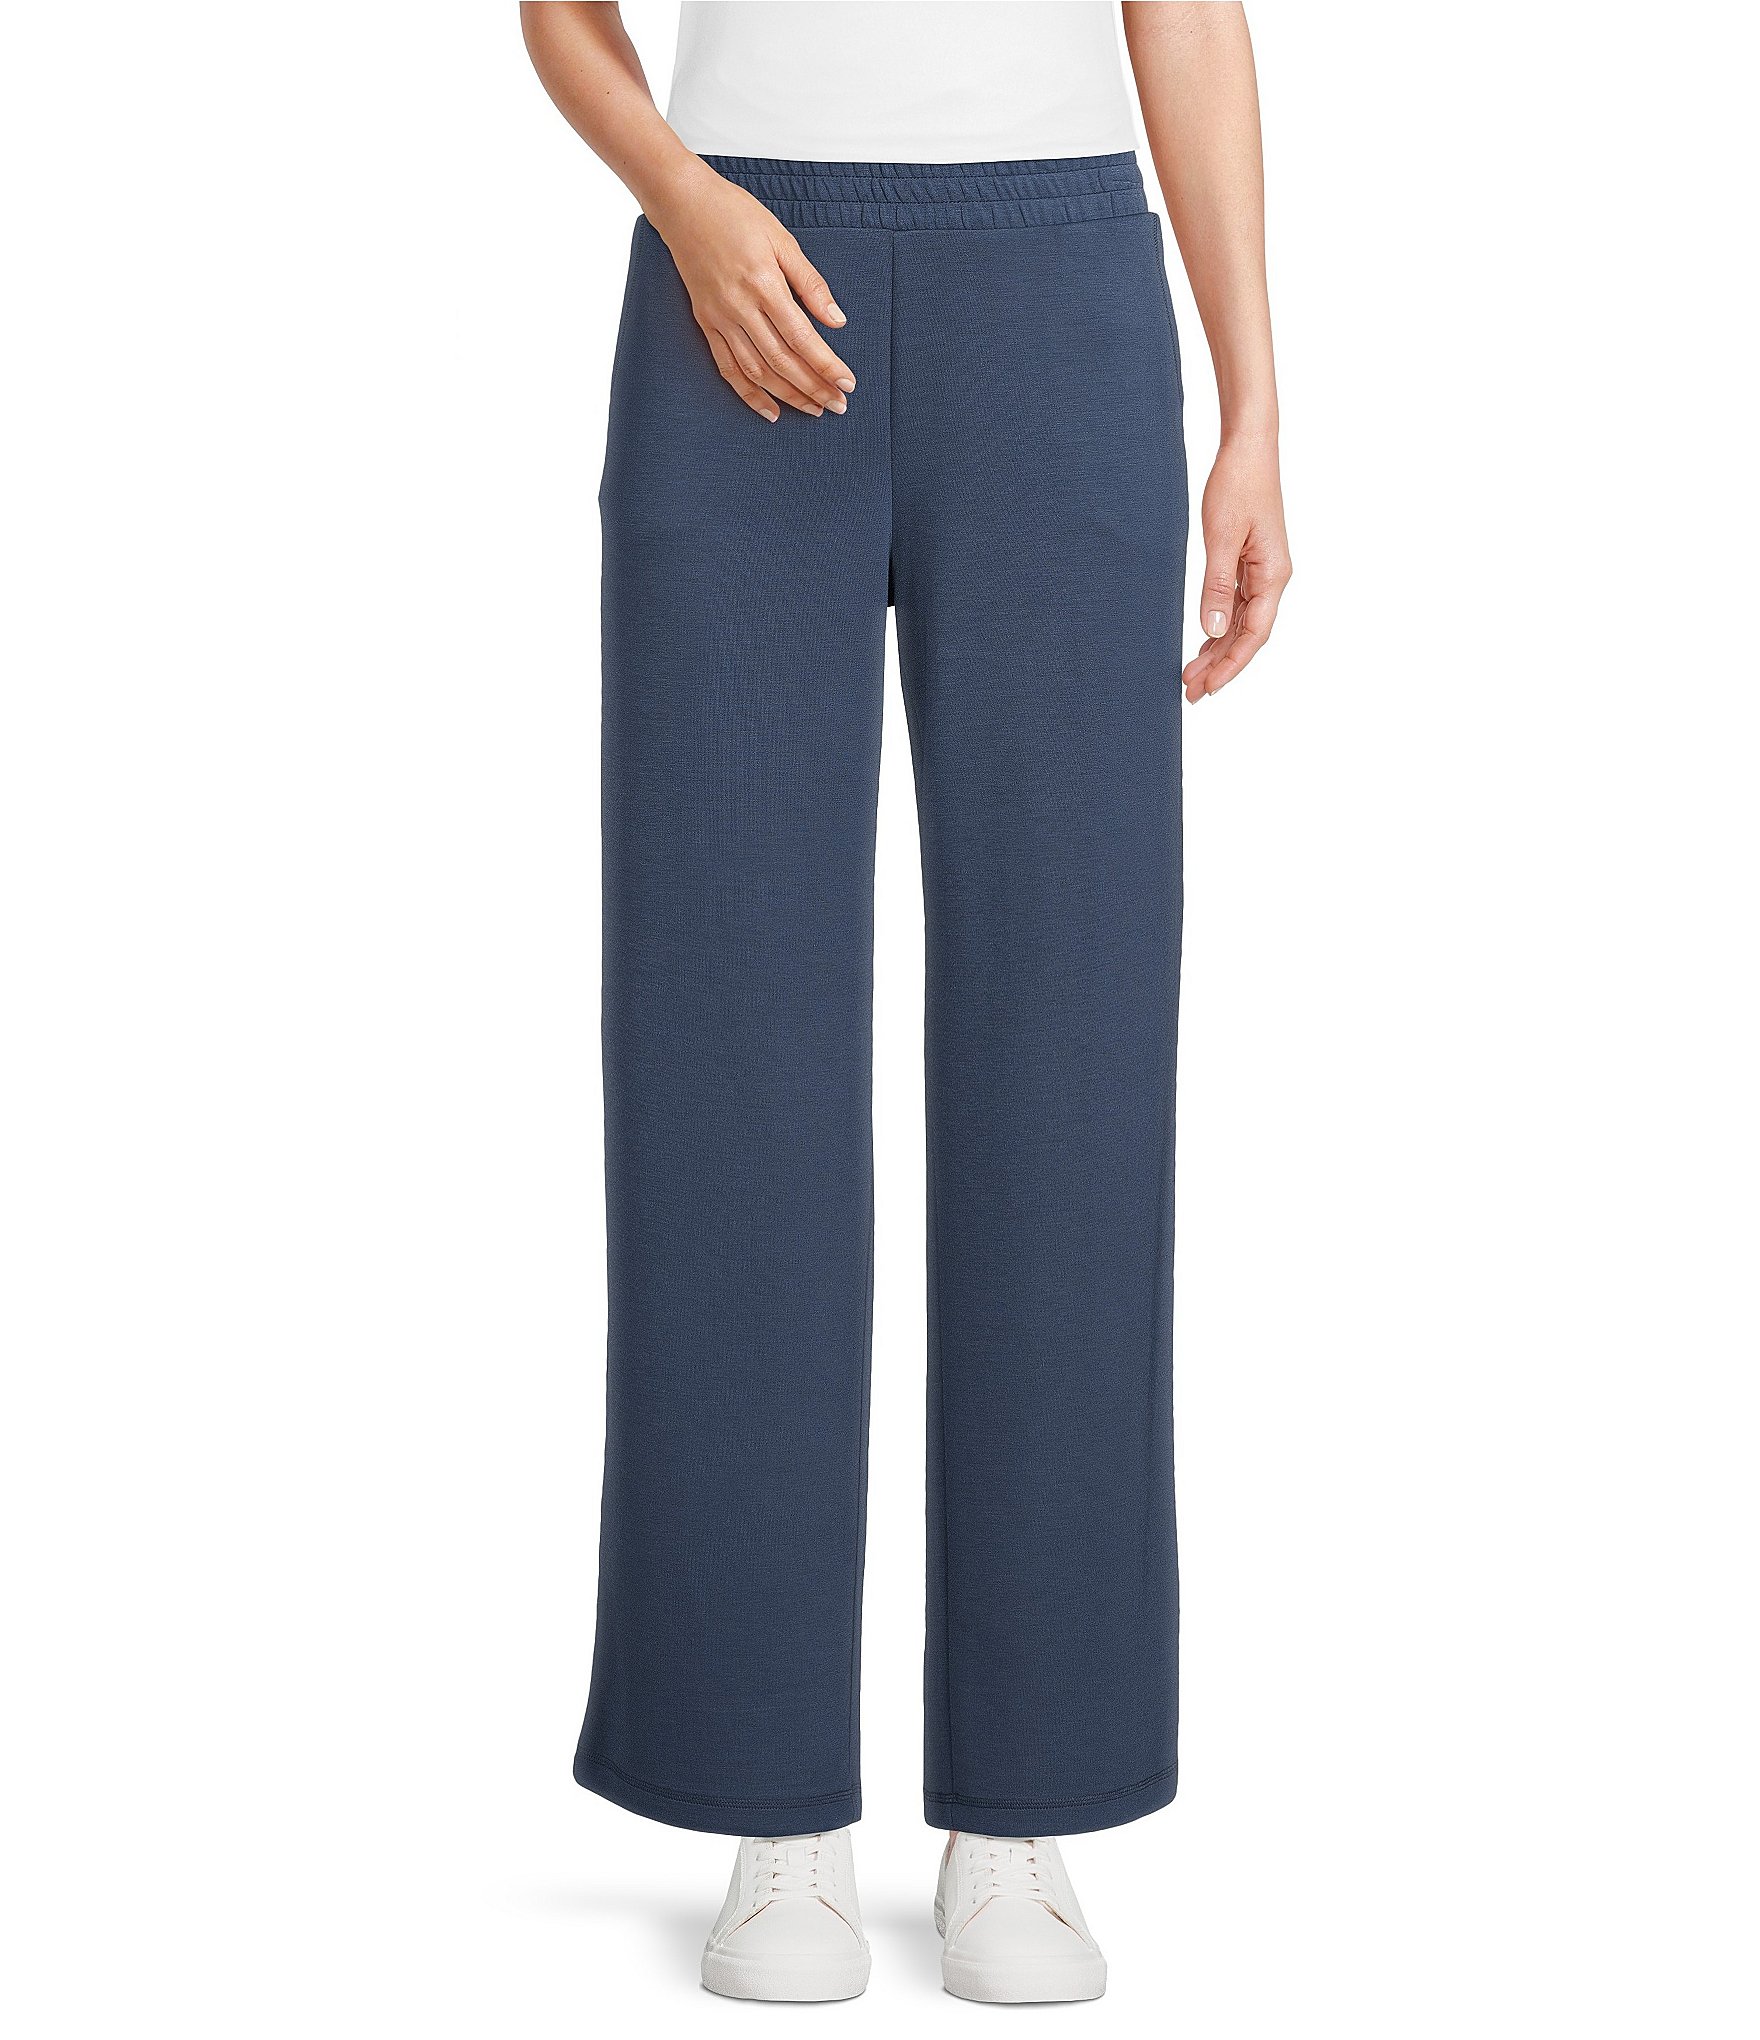 Westbound Petite Size Crop High Rise Pull-on Pant